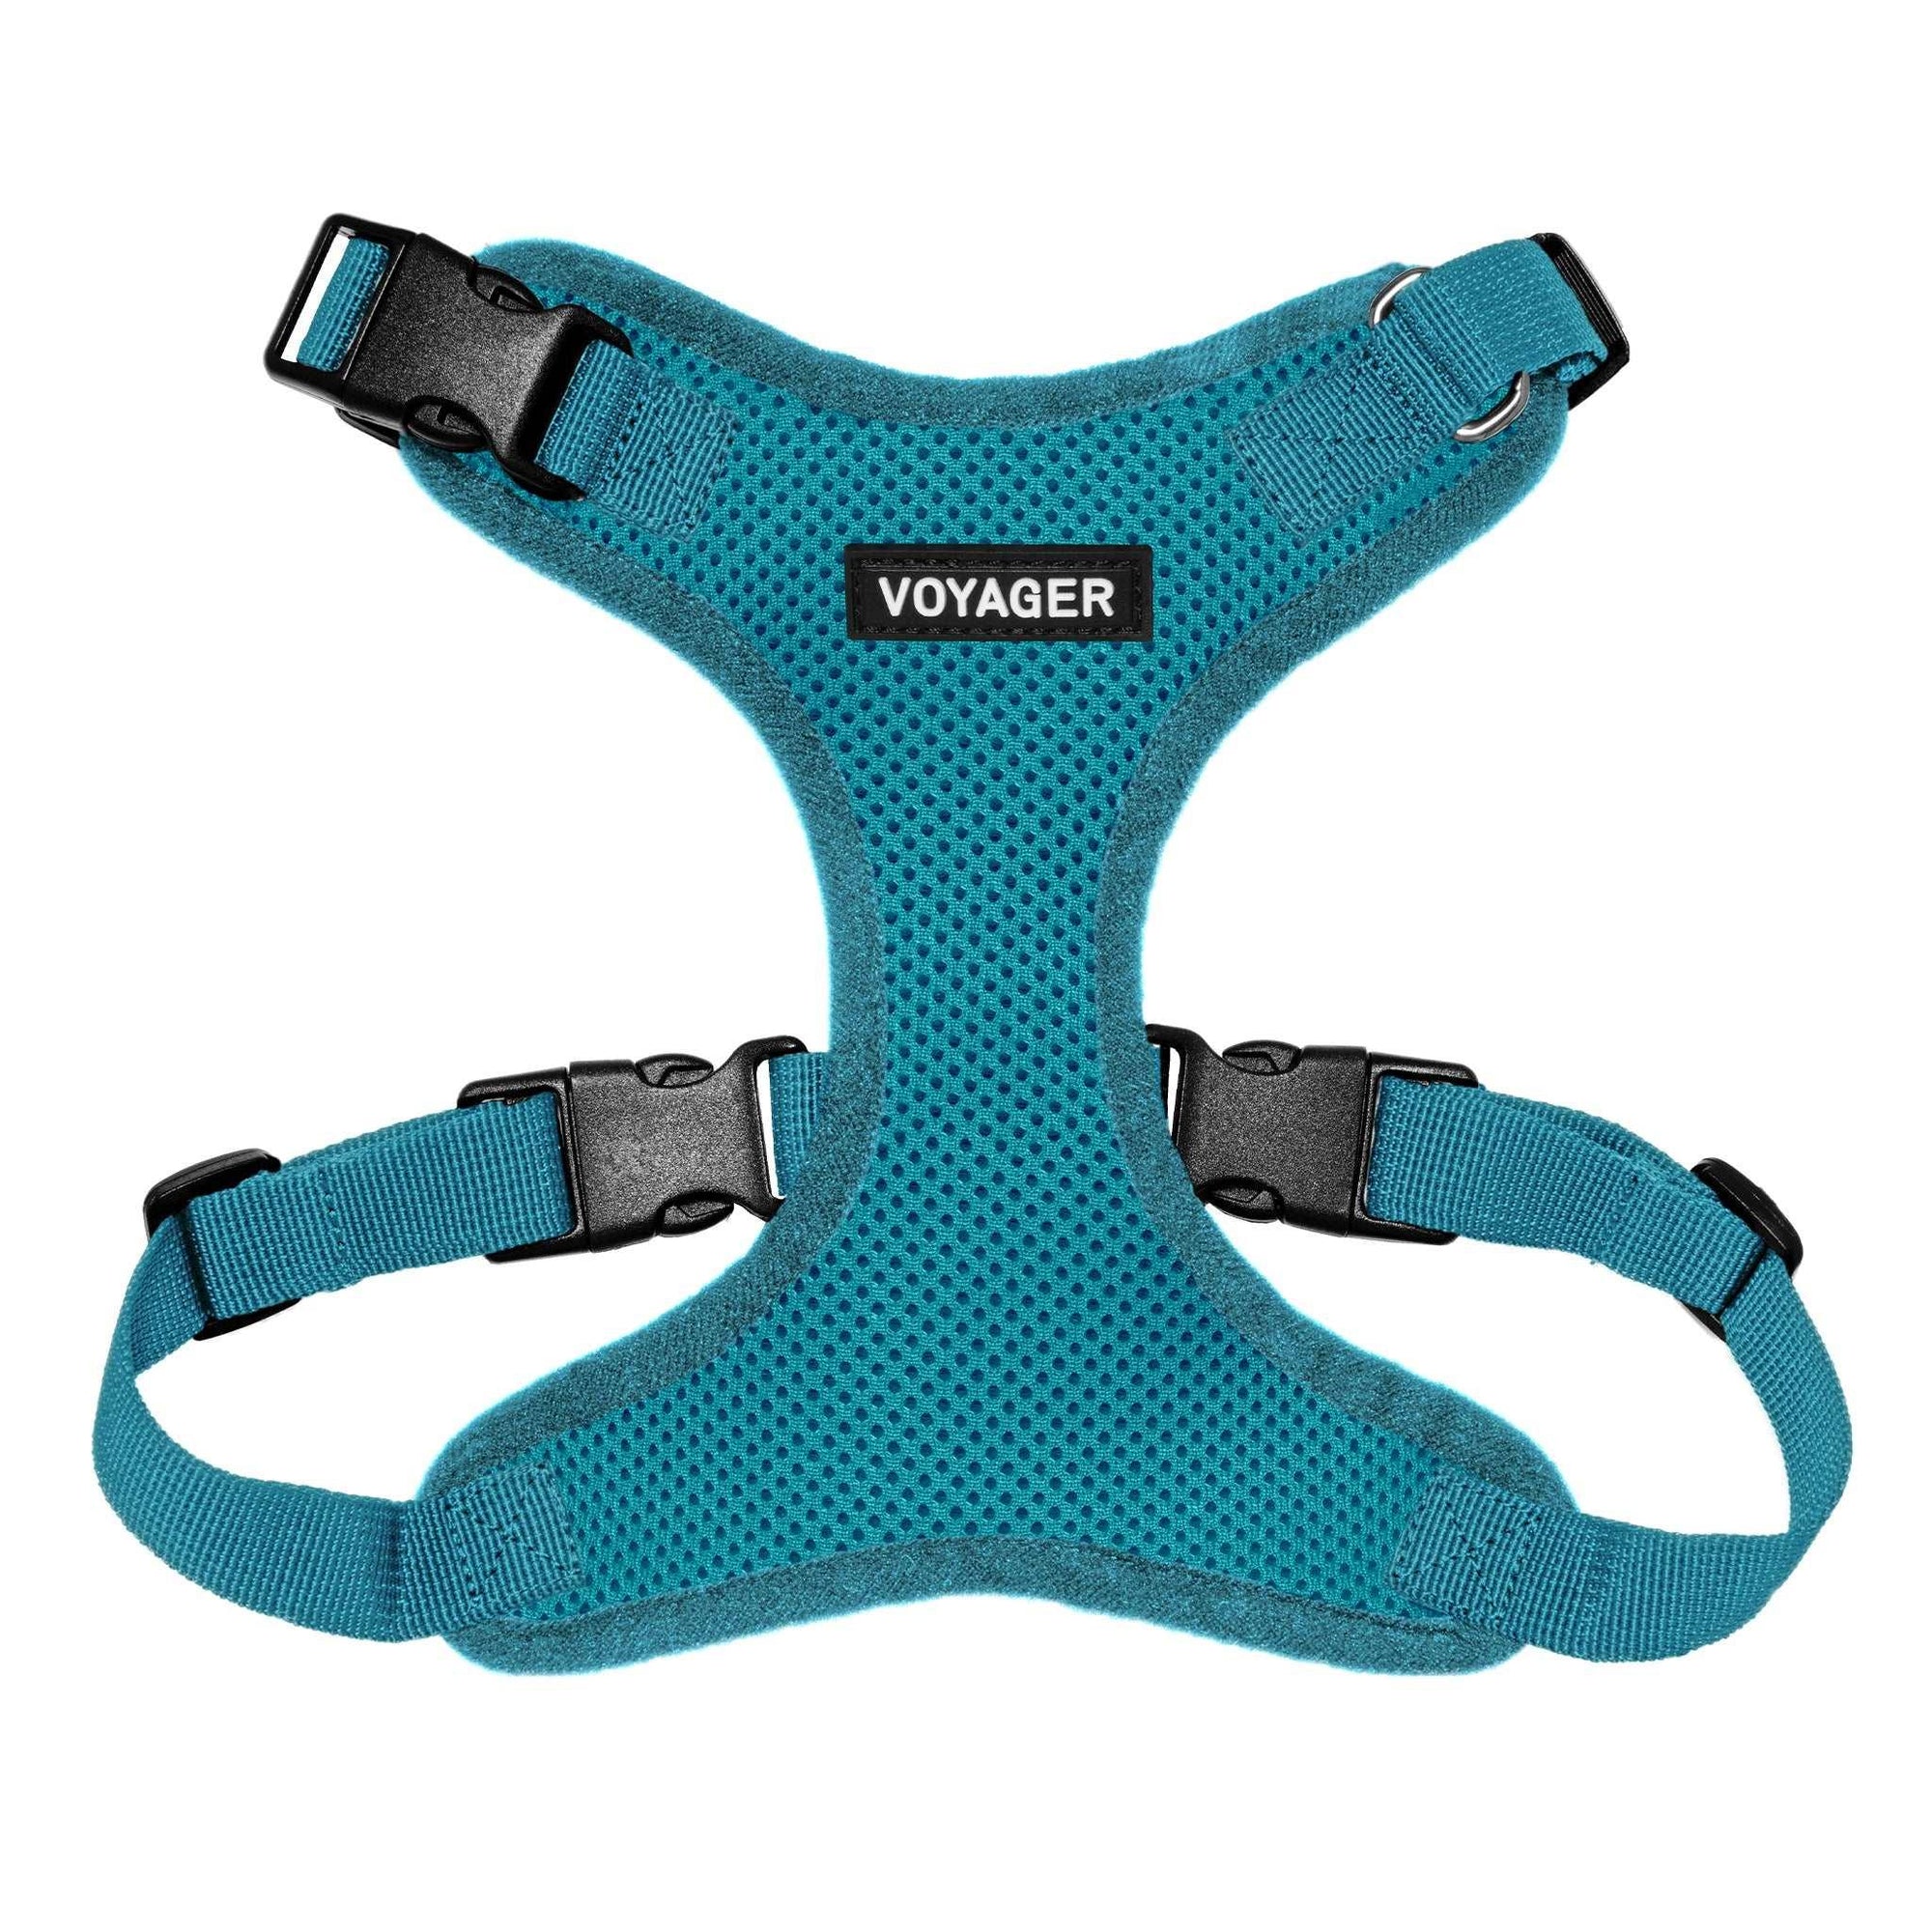 VOYAGER Step-In Lock Dog Harness in Turquoise with Matching Trim and Webbing - Front